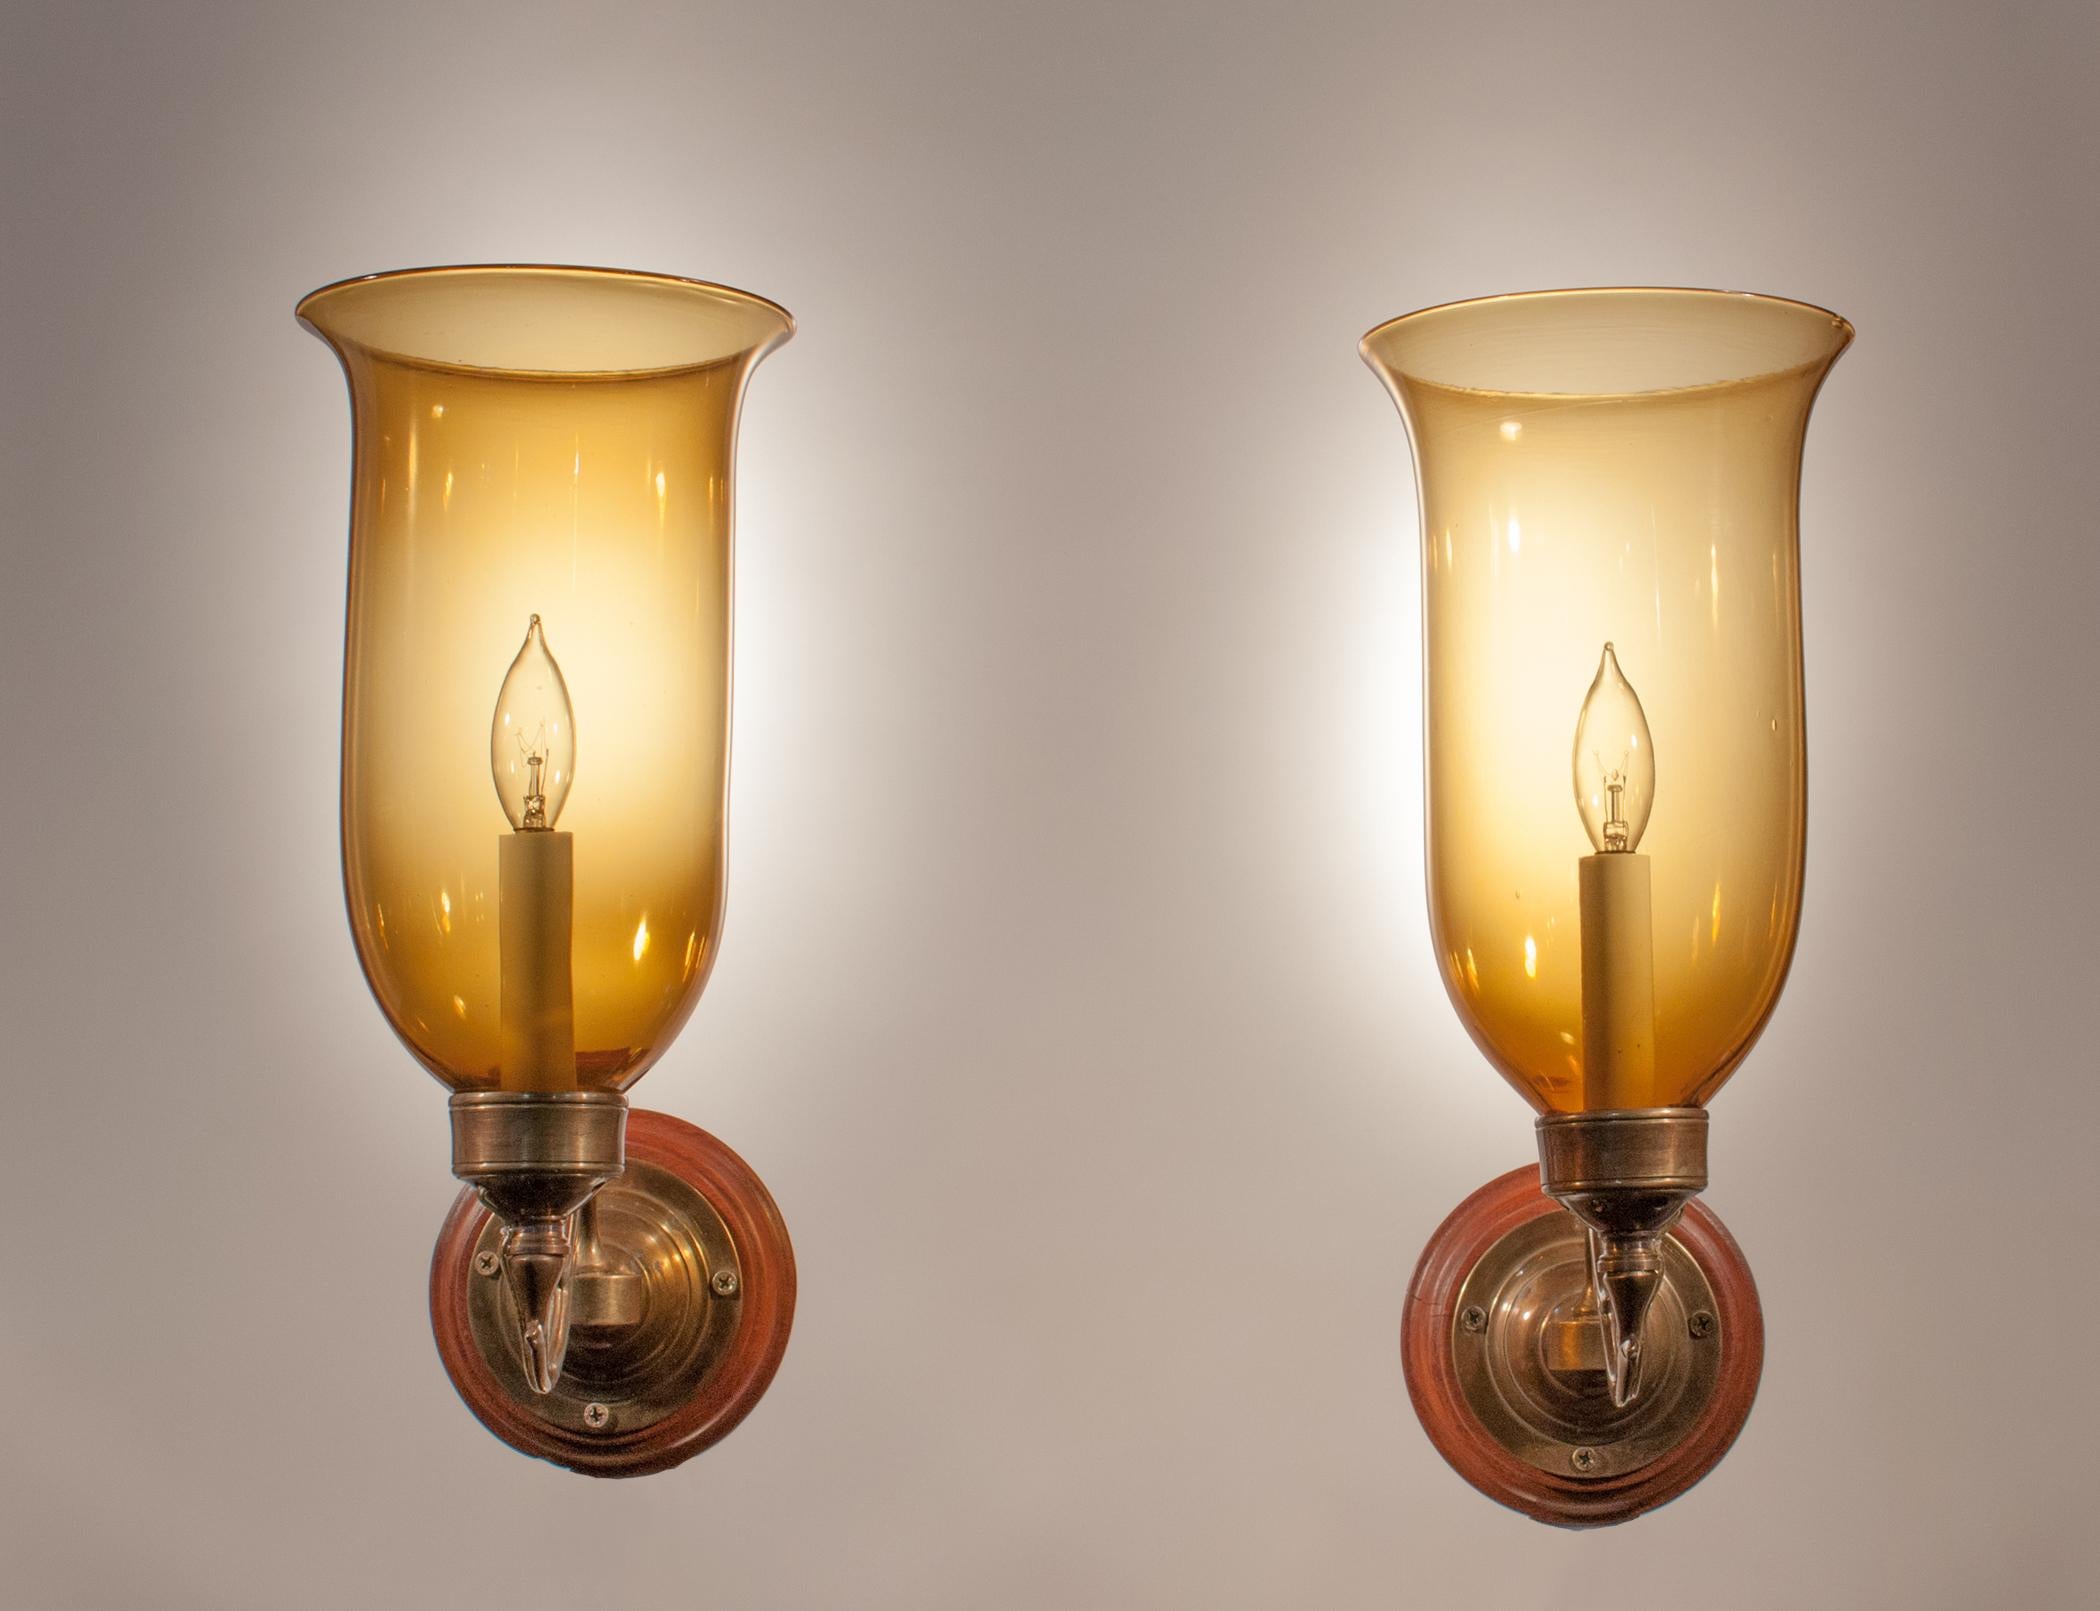 English 19th Century Hurricane Shade Sconces with Amber Colored Glass